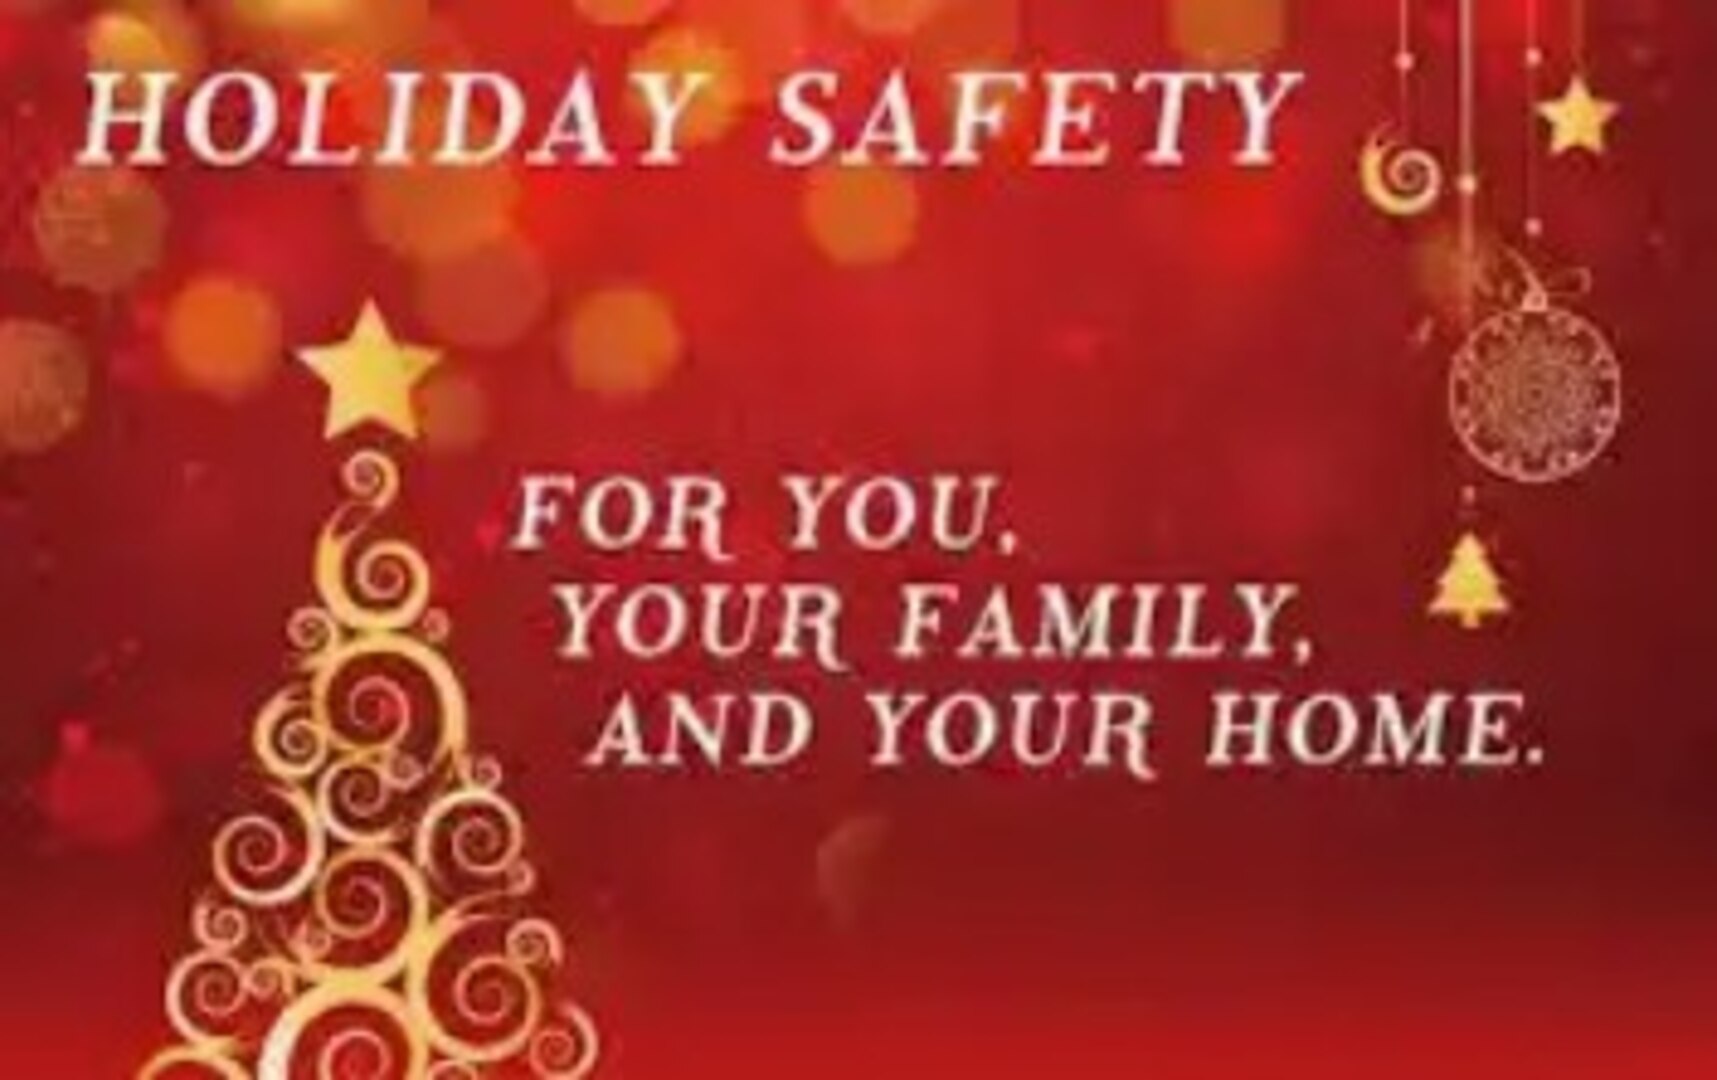 Protecting your family during the holidays.